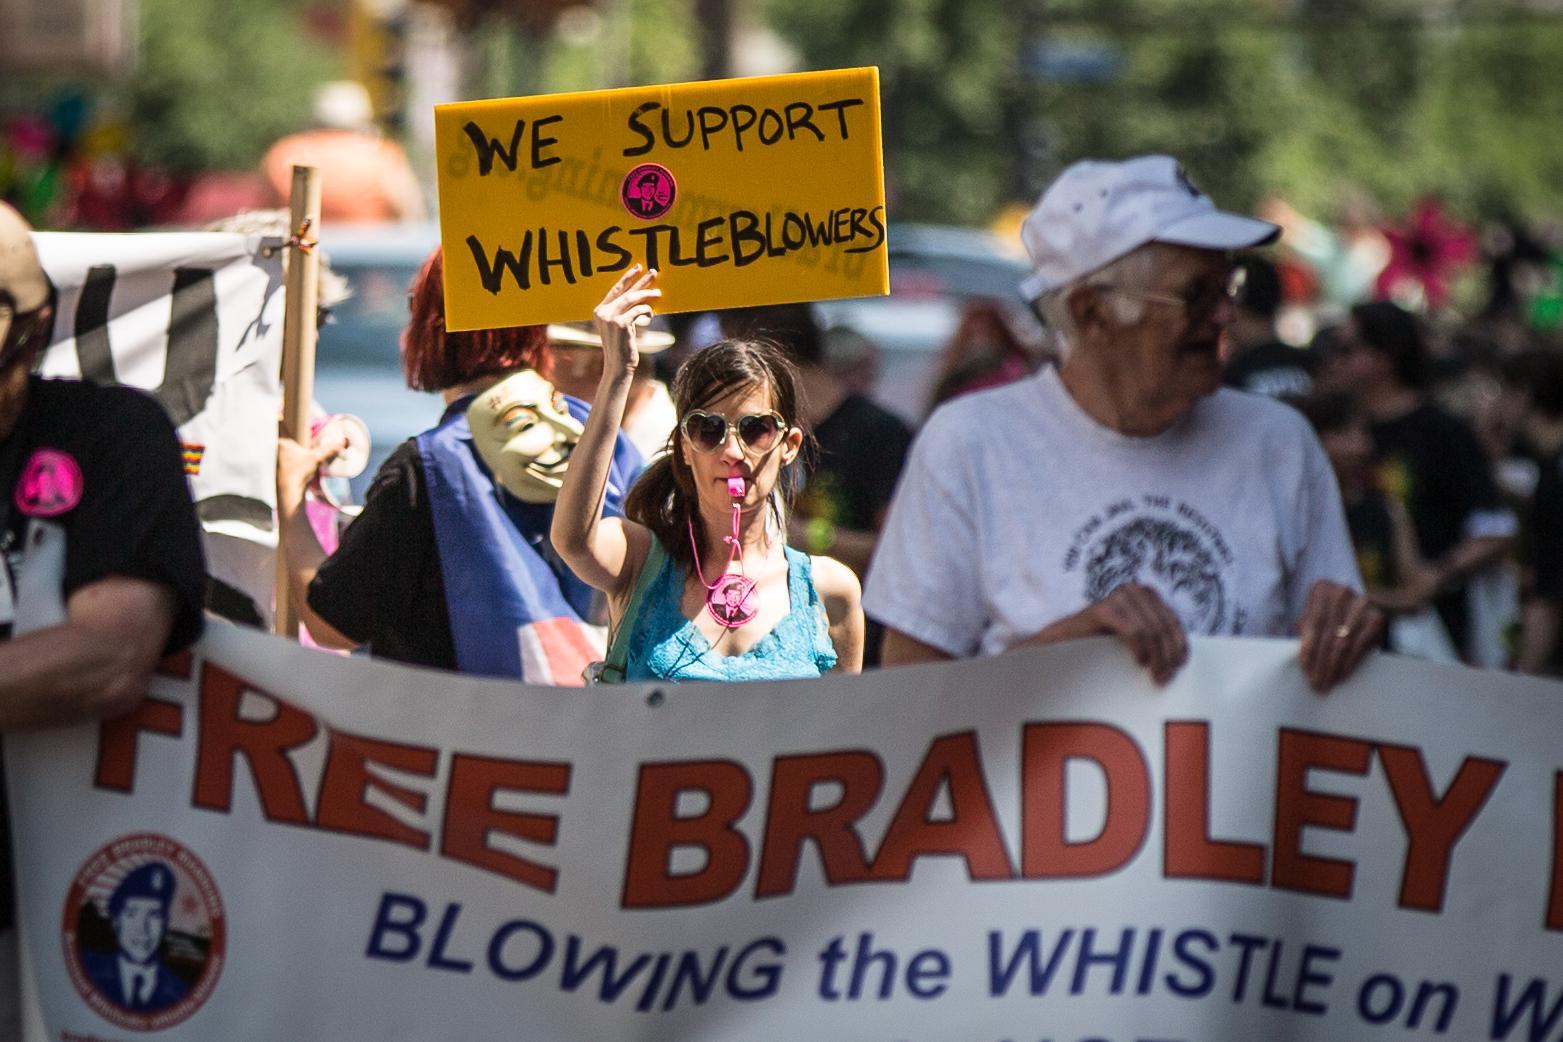 we_support_whistleblowers_free_bradley_chelsea_manning_2013_twin_cities_pride_parade_minneapolis_9181428436